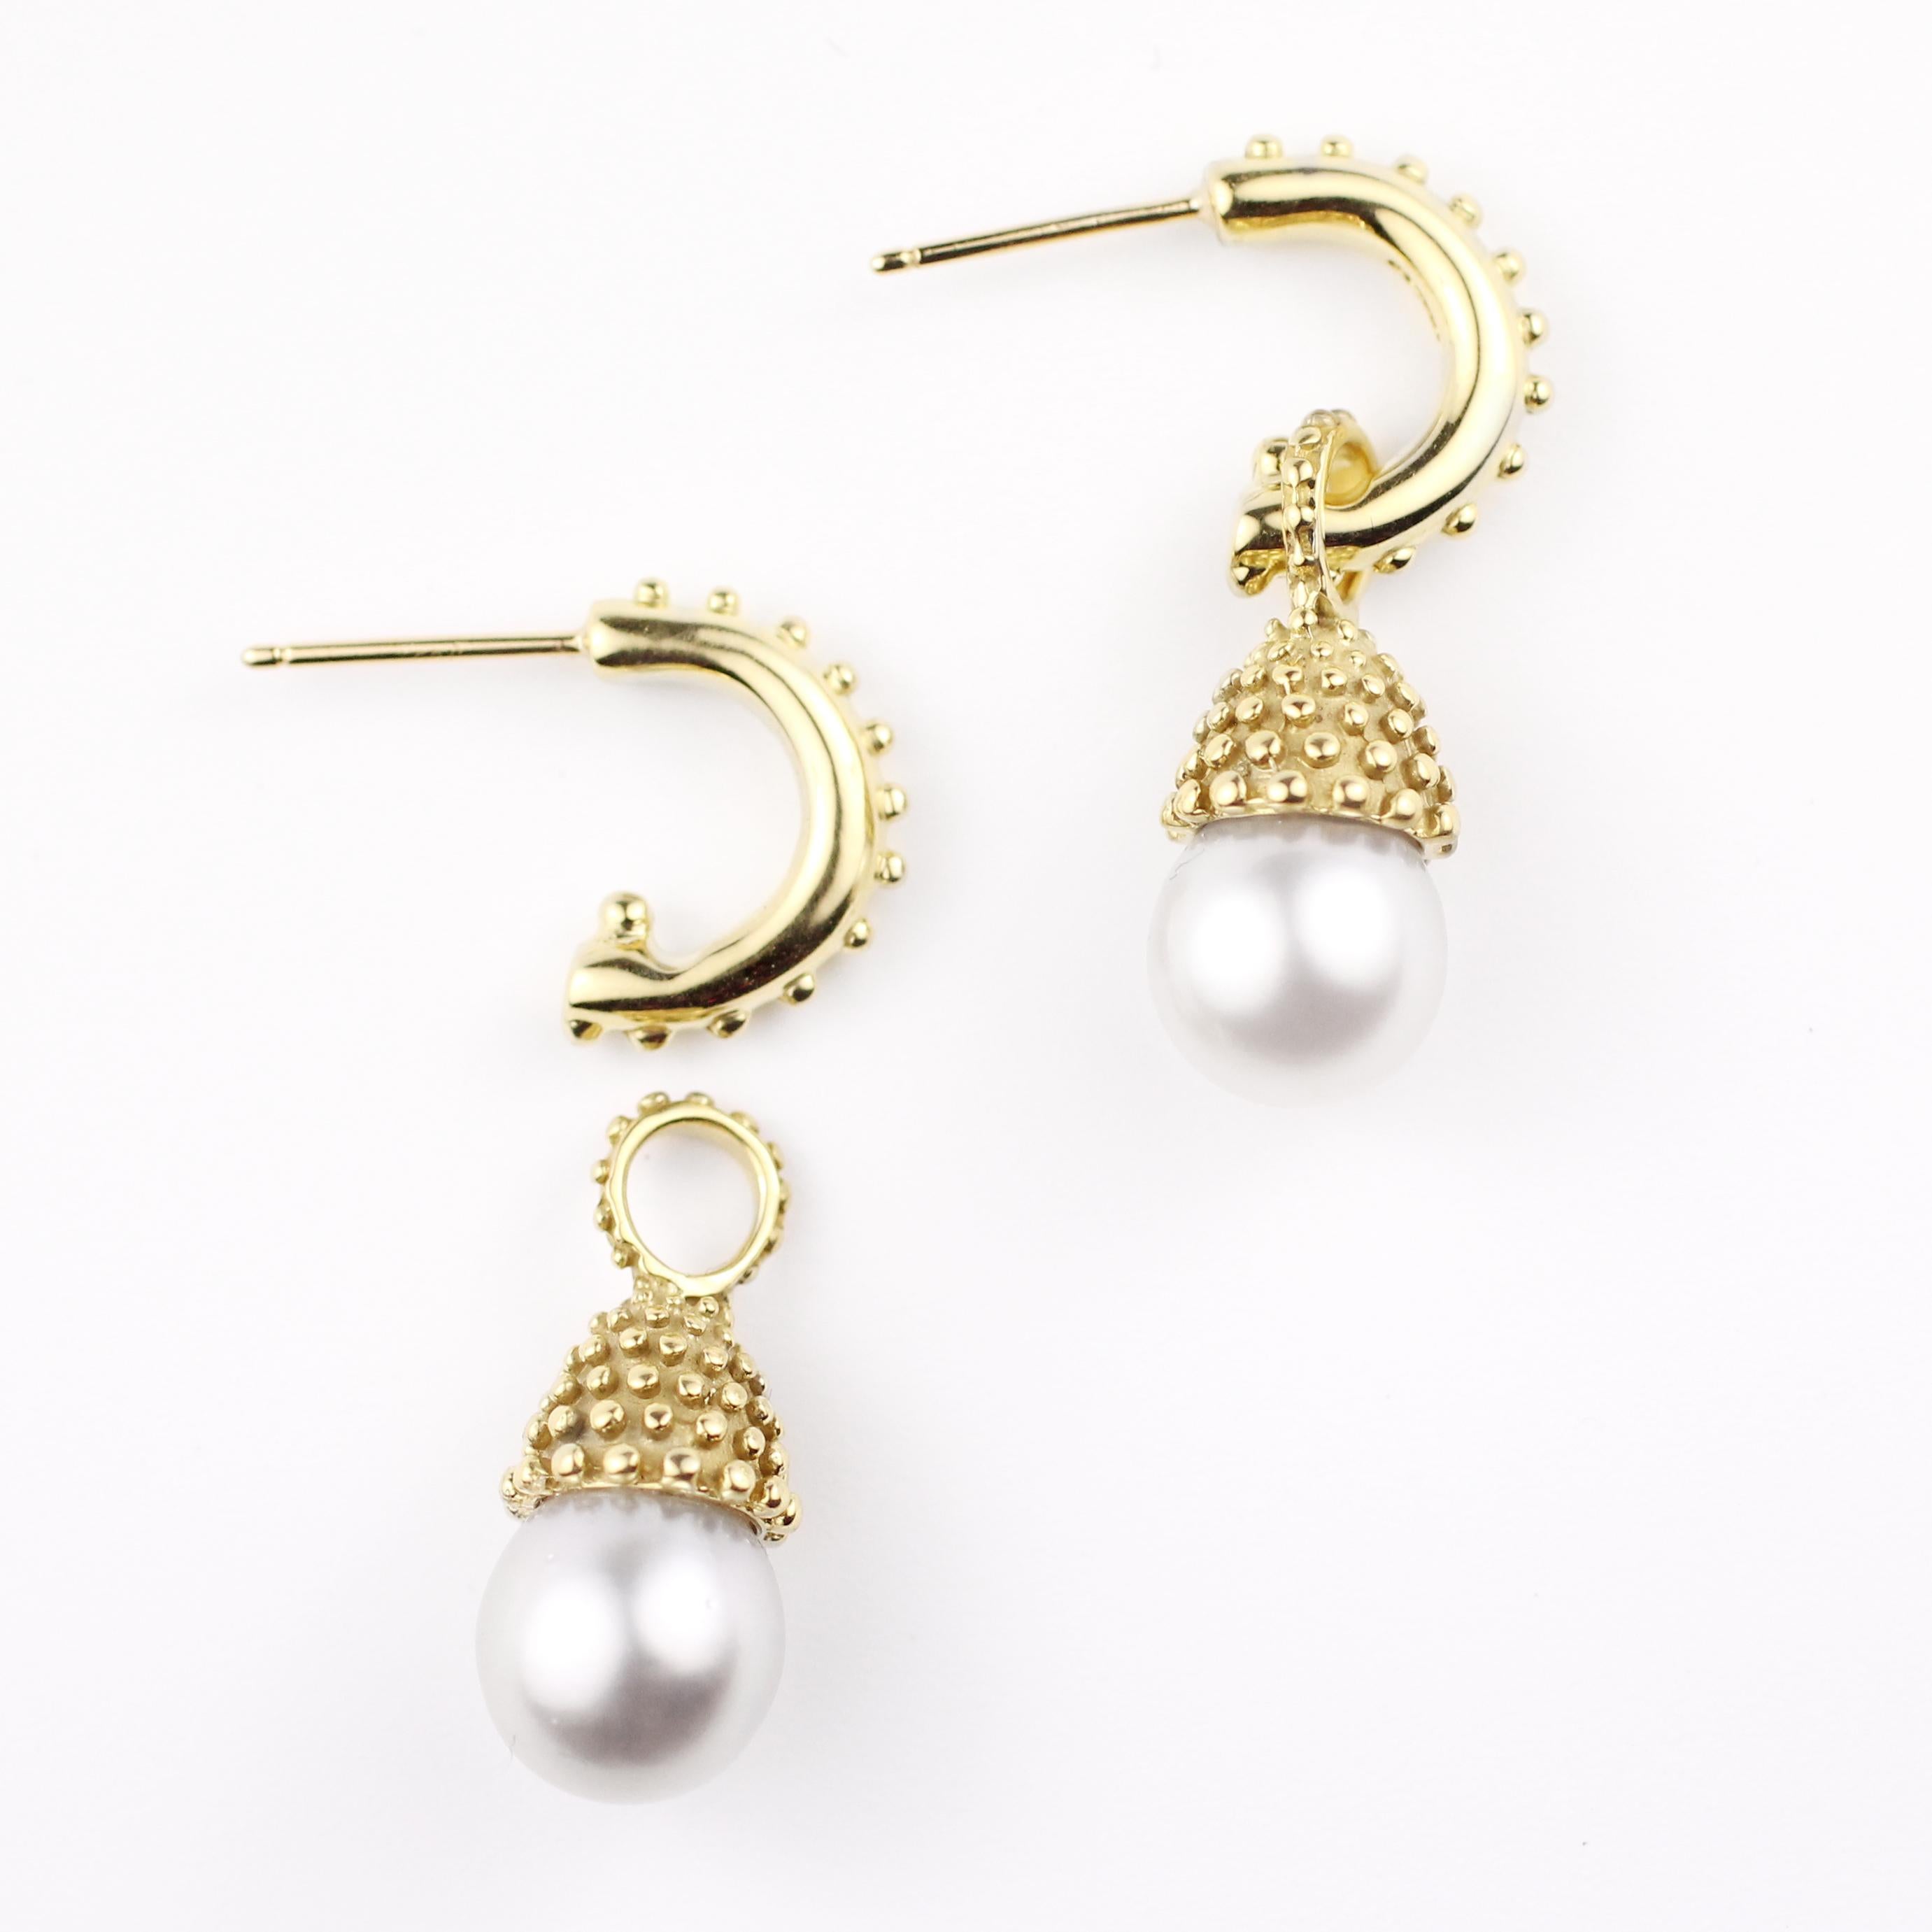 These 18 Kt Gold and Pearl Drop Earrings have real presence and are in the classic 